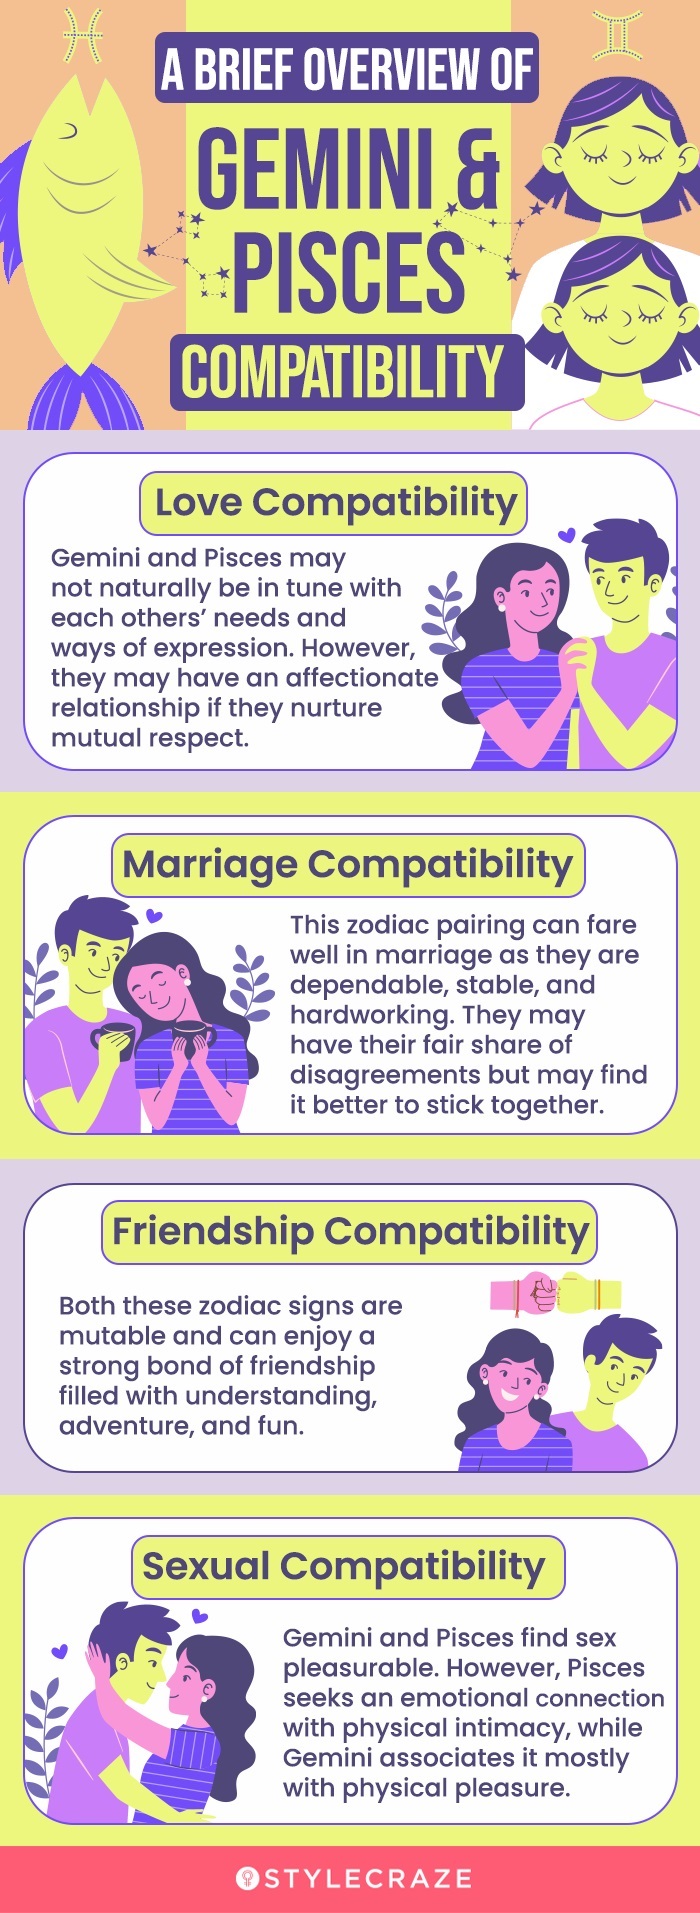 a brief overview of gemini and pisces compatibility (infographic)